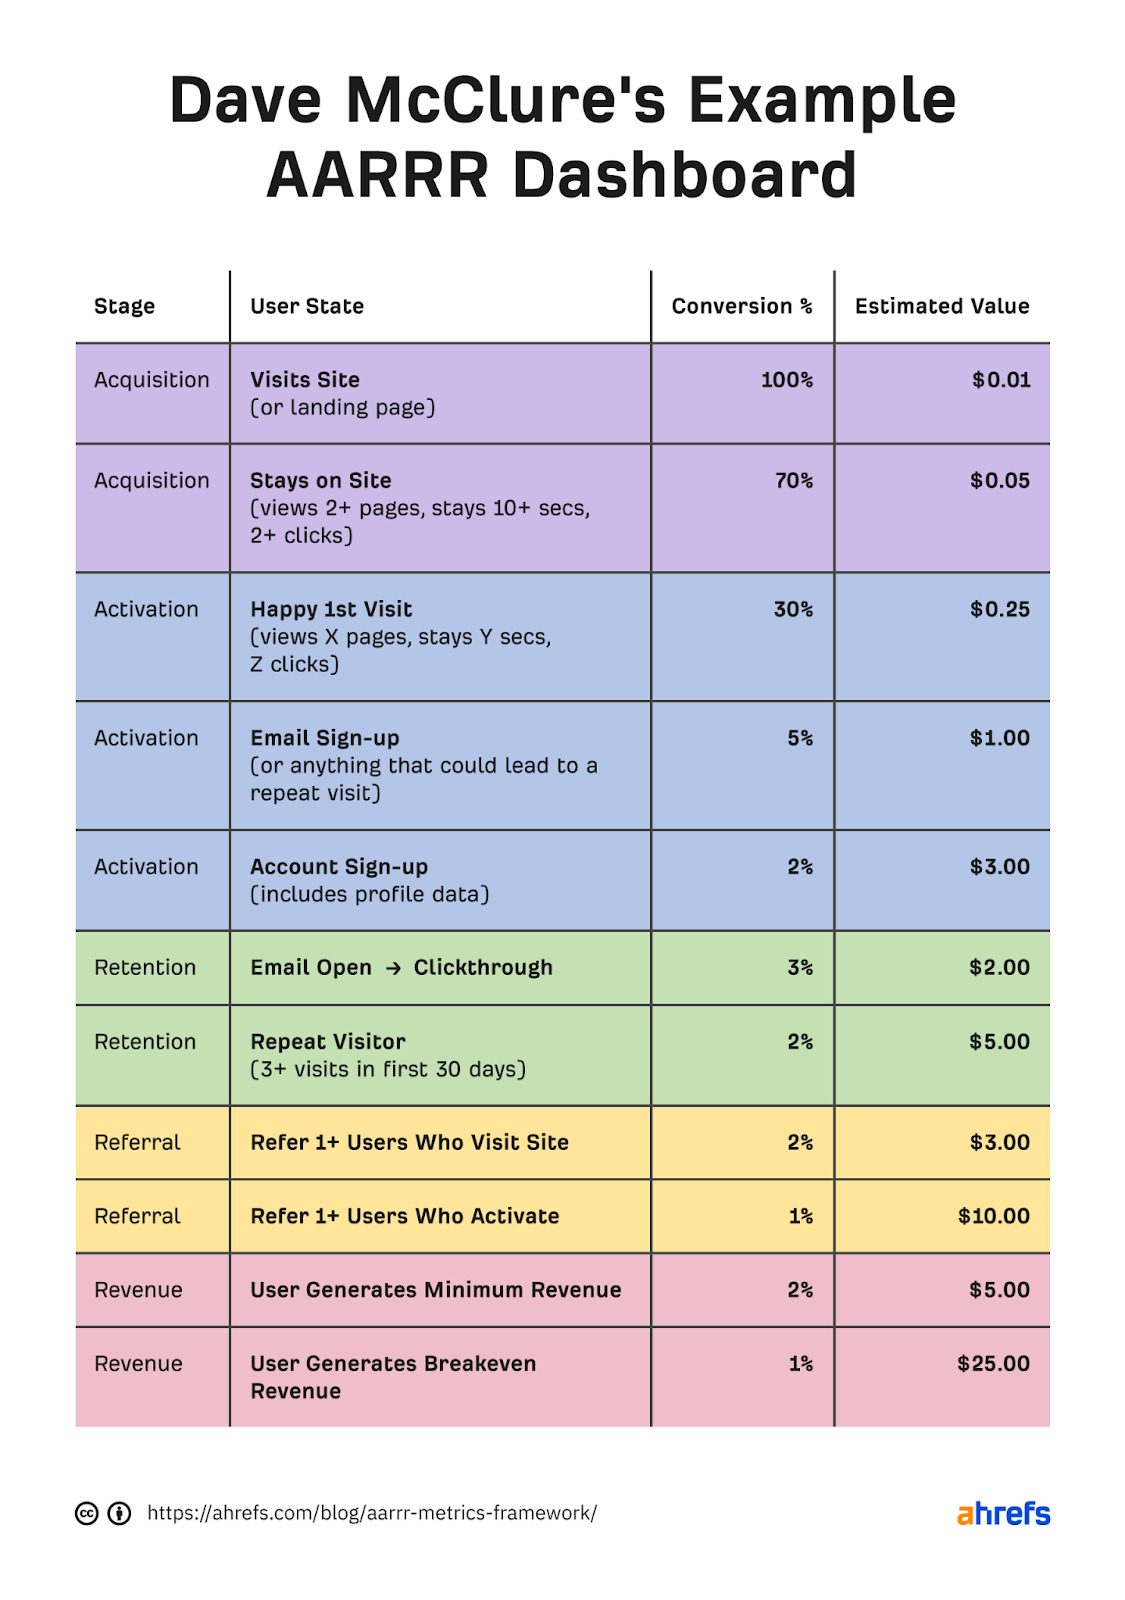 Table of AARRR's stages, along with corresponding info on user state, conversion, and estimated value 